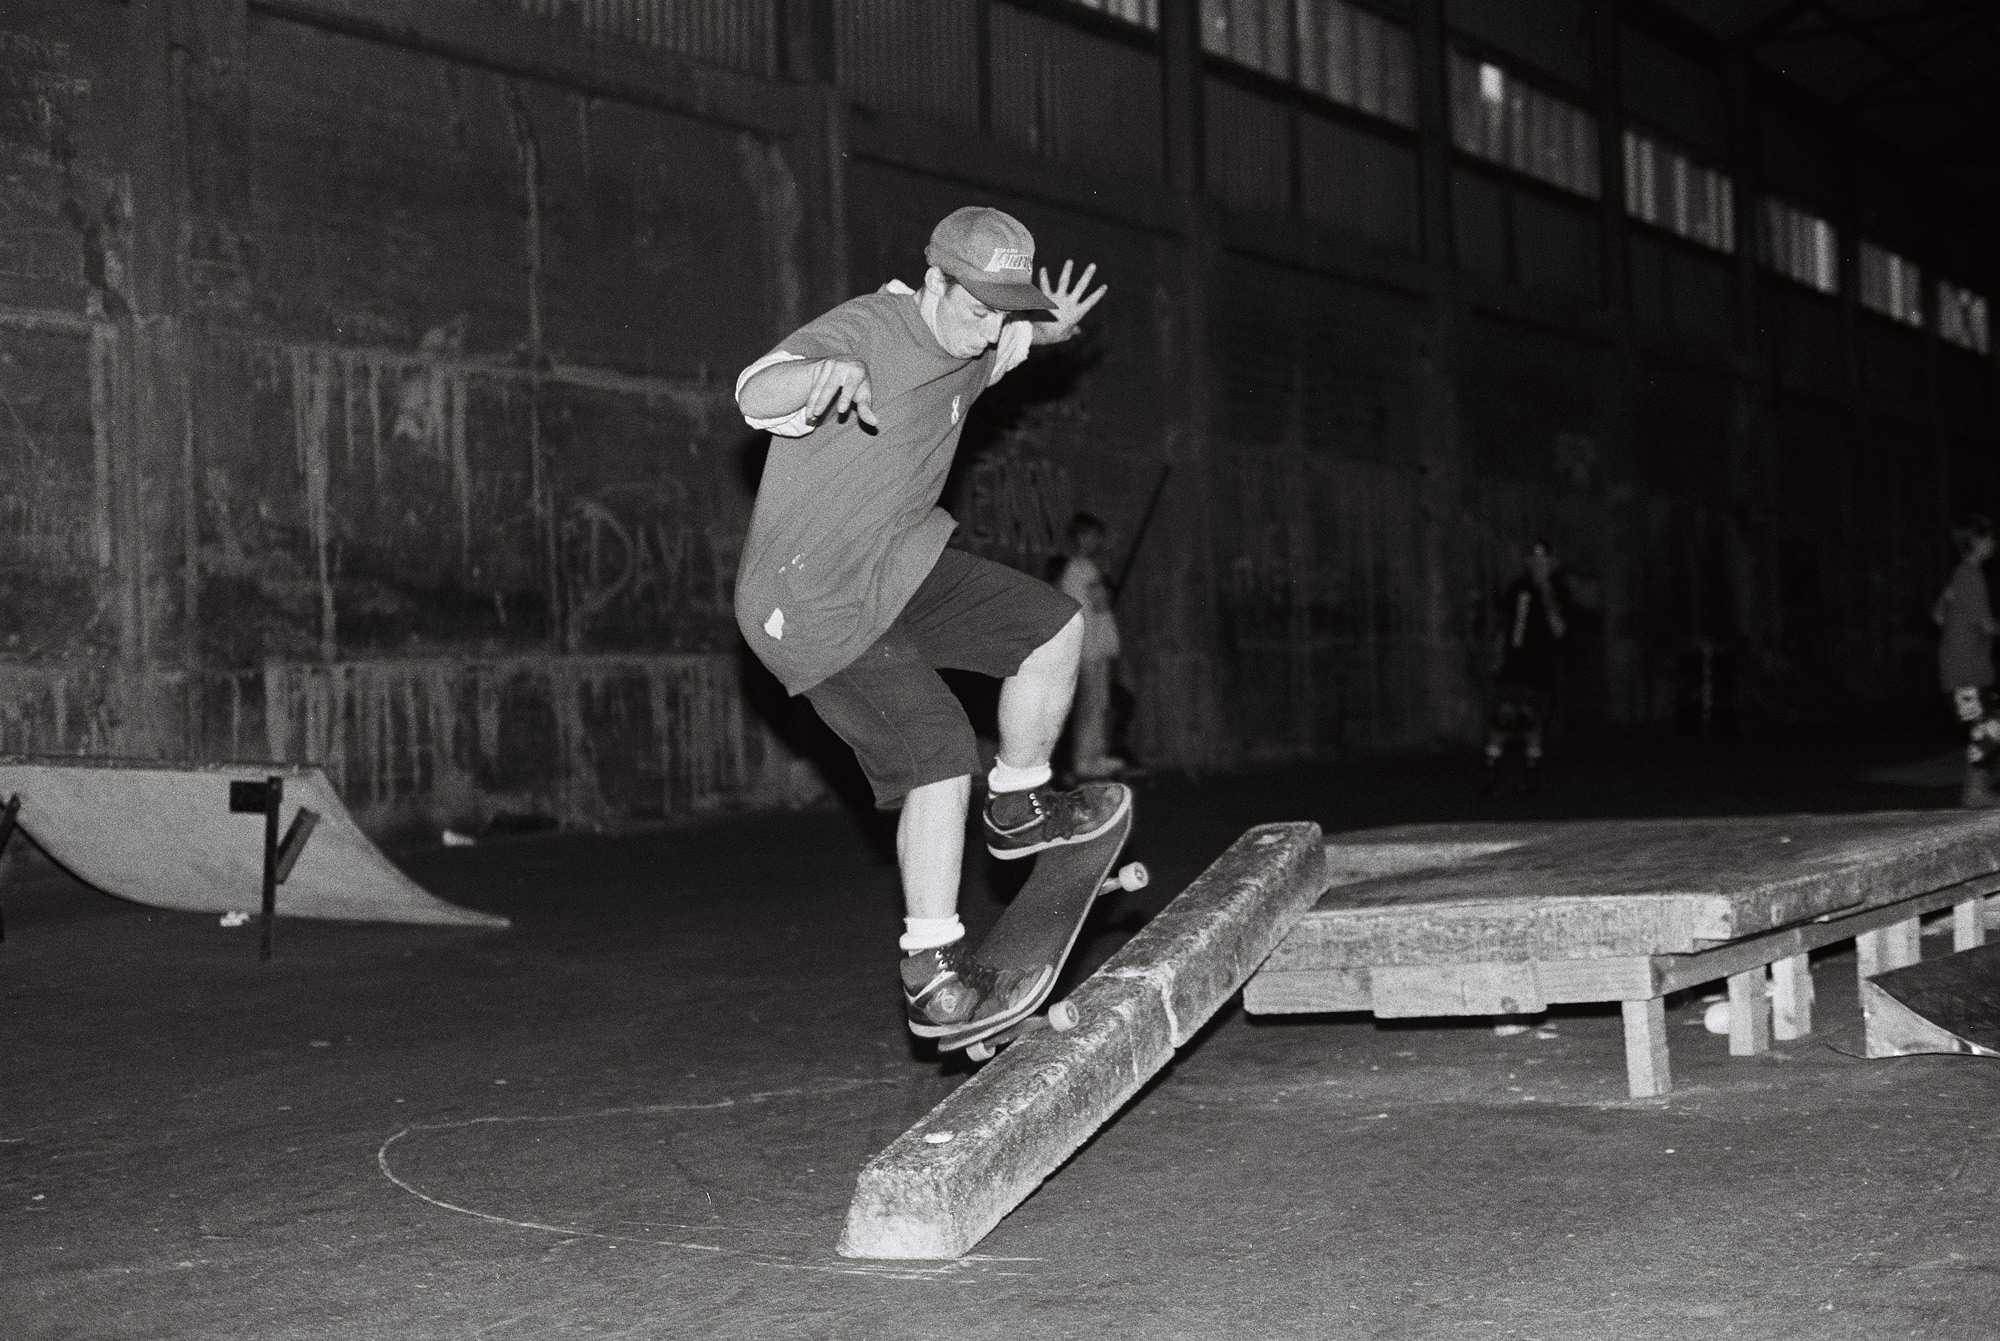 Ivan Gregoroff performing a frontside nosegrind on a parking block ledge at The Skate Pit in Wellington, 1990.